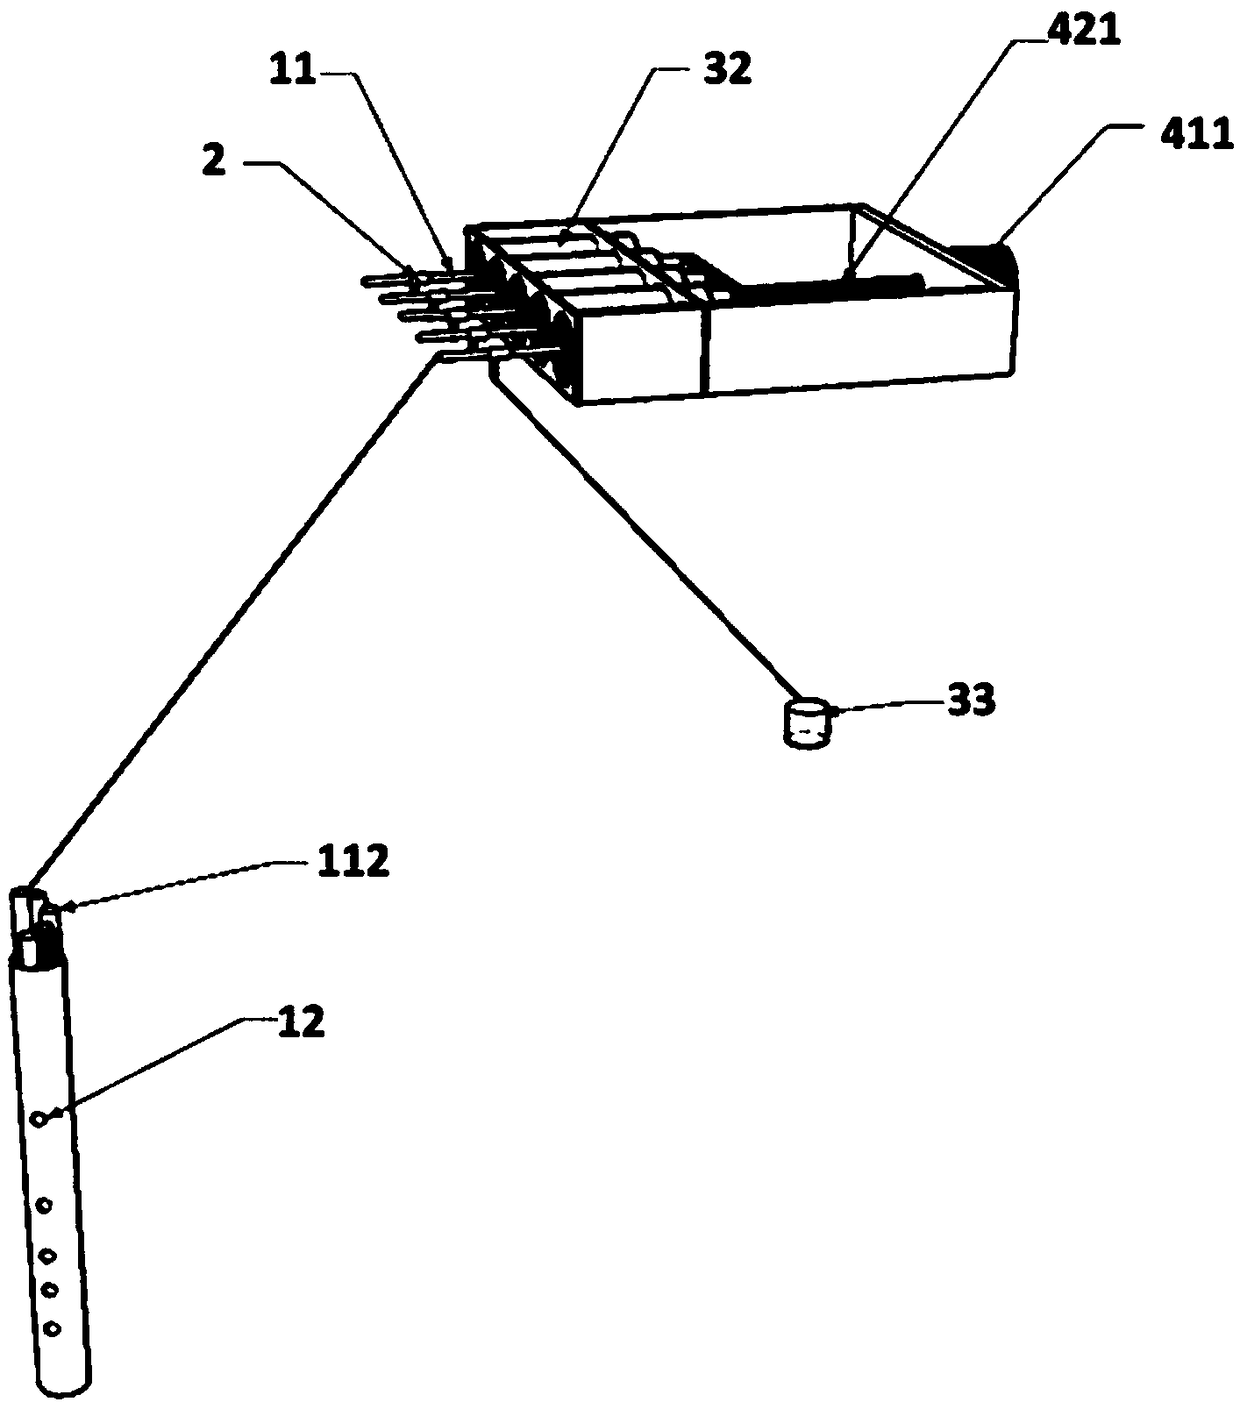 Underwater multi-dimensional automatic water sample collecting device